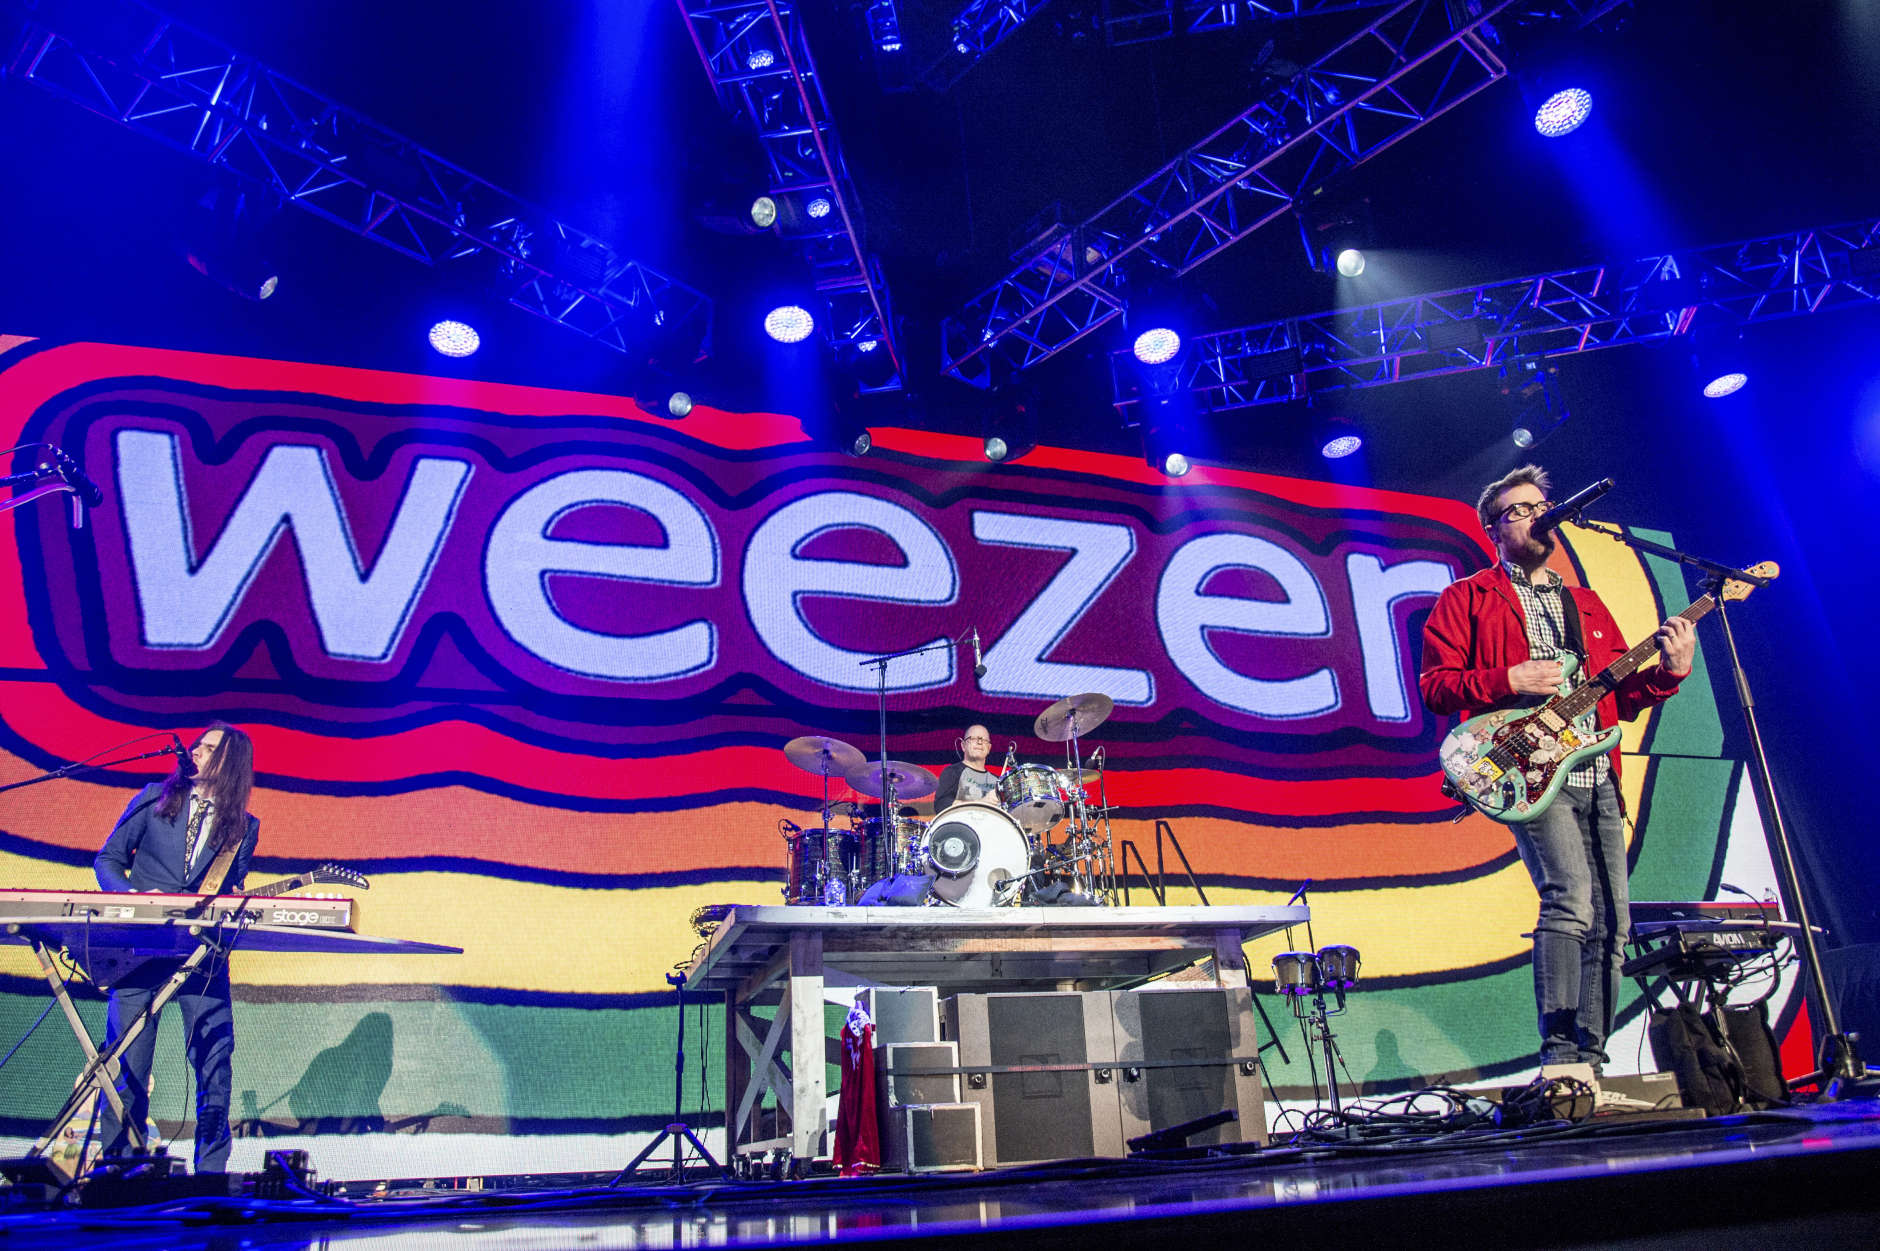 Brian Bell, from left, Patrick Wilson, Rivers Cuomo, and Scott Shriner of Weezer perform at the 2016 KROQ Almost Acoustic Christmas at The Forum on Sunday, Dec. 11, 2016, in Inglewood, Calif. (Photo by Amy Harris/Invision/AP)